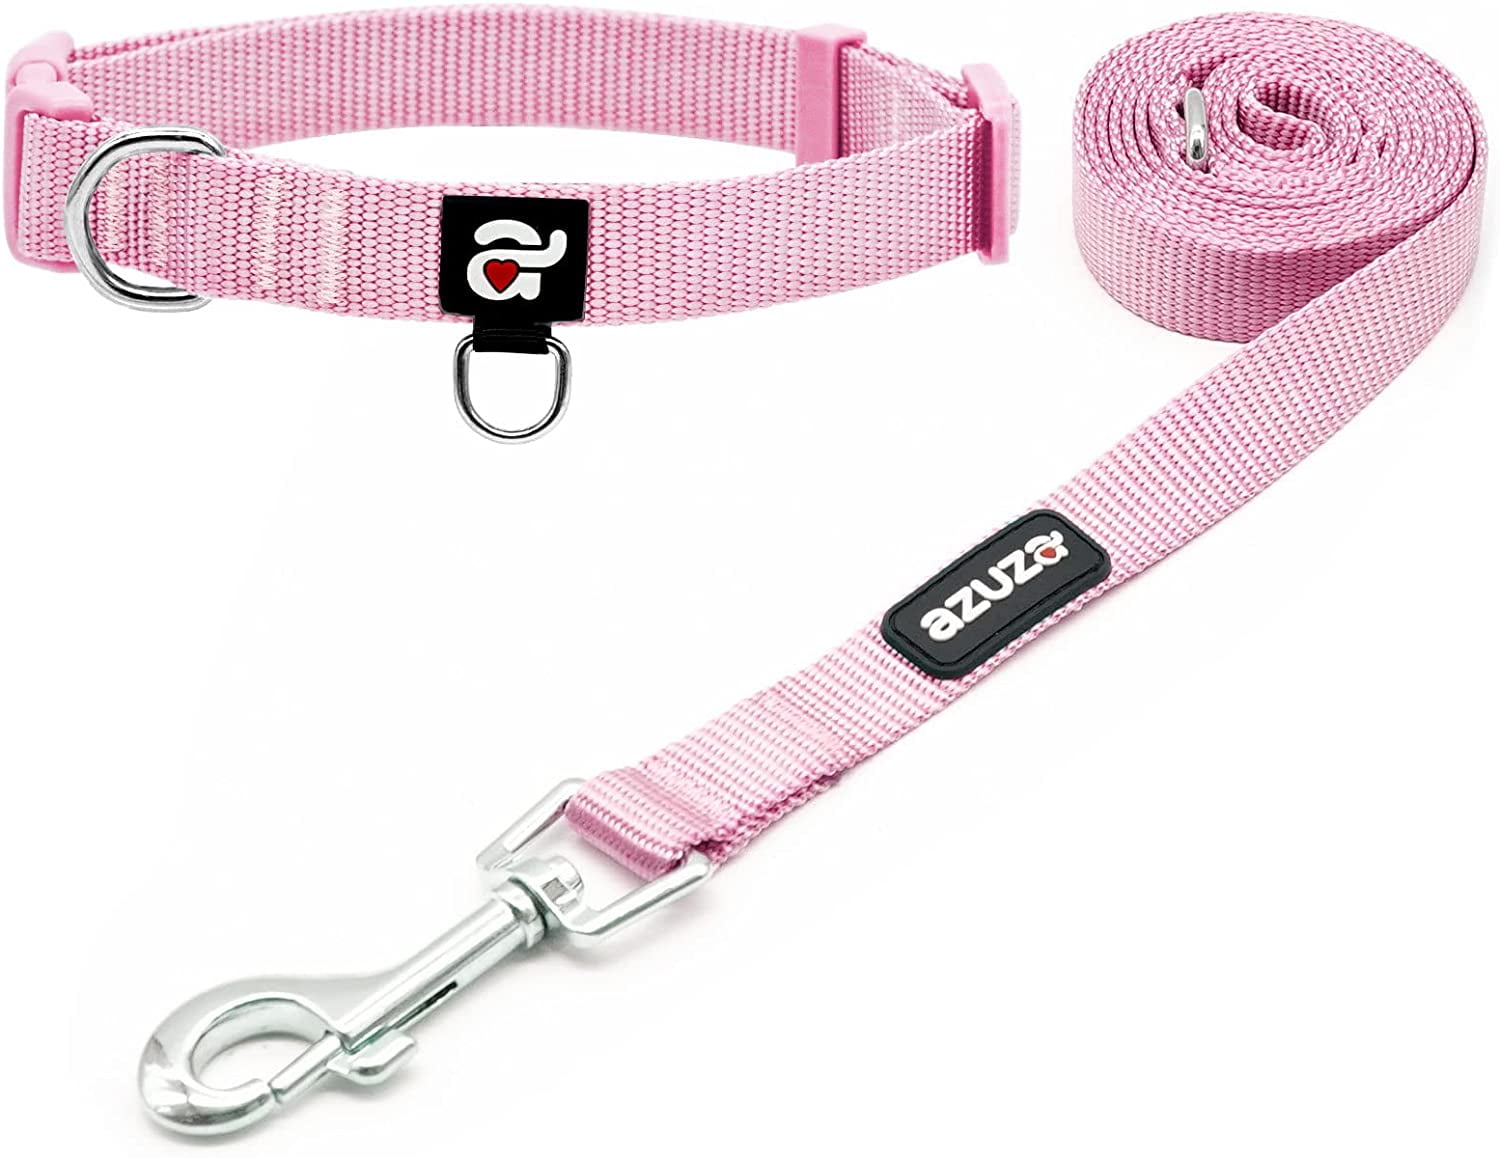 Brand New Florida Large Pet Dog Collar(1 inch Wide, 18-30 inch long), and Large Leash (1 inch Wide, 6 Feet Long) Bundle, Official Florida/State Logo/